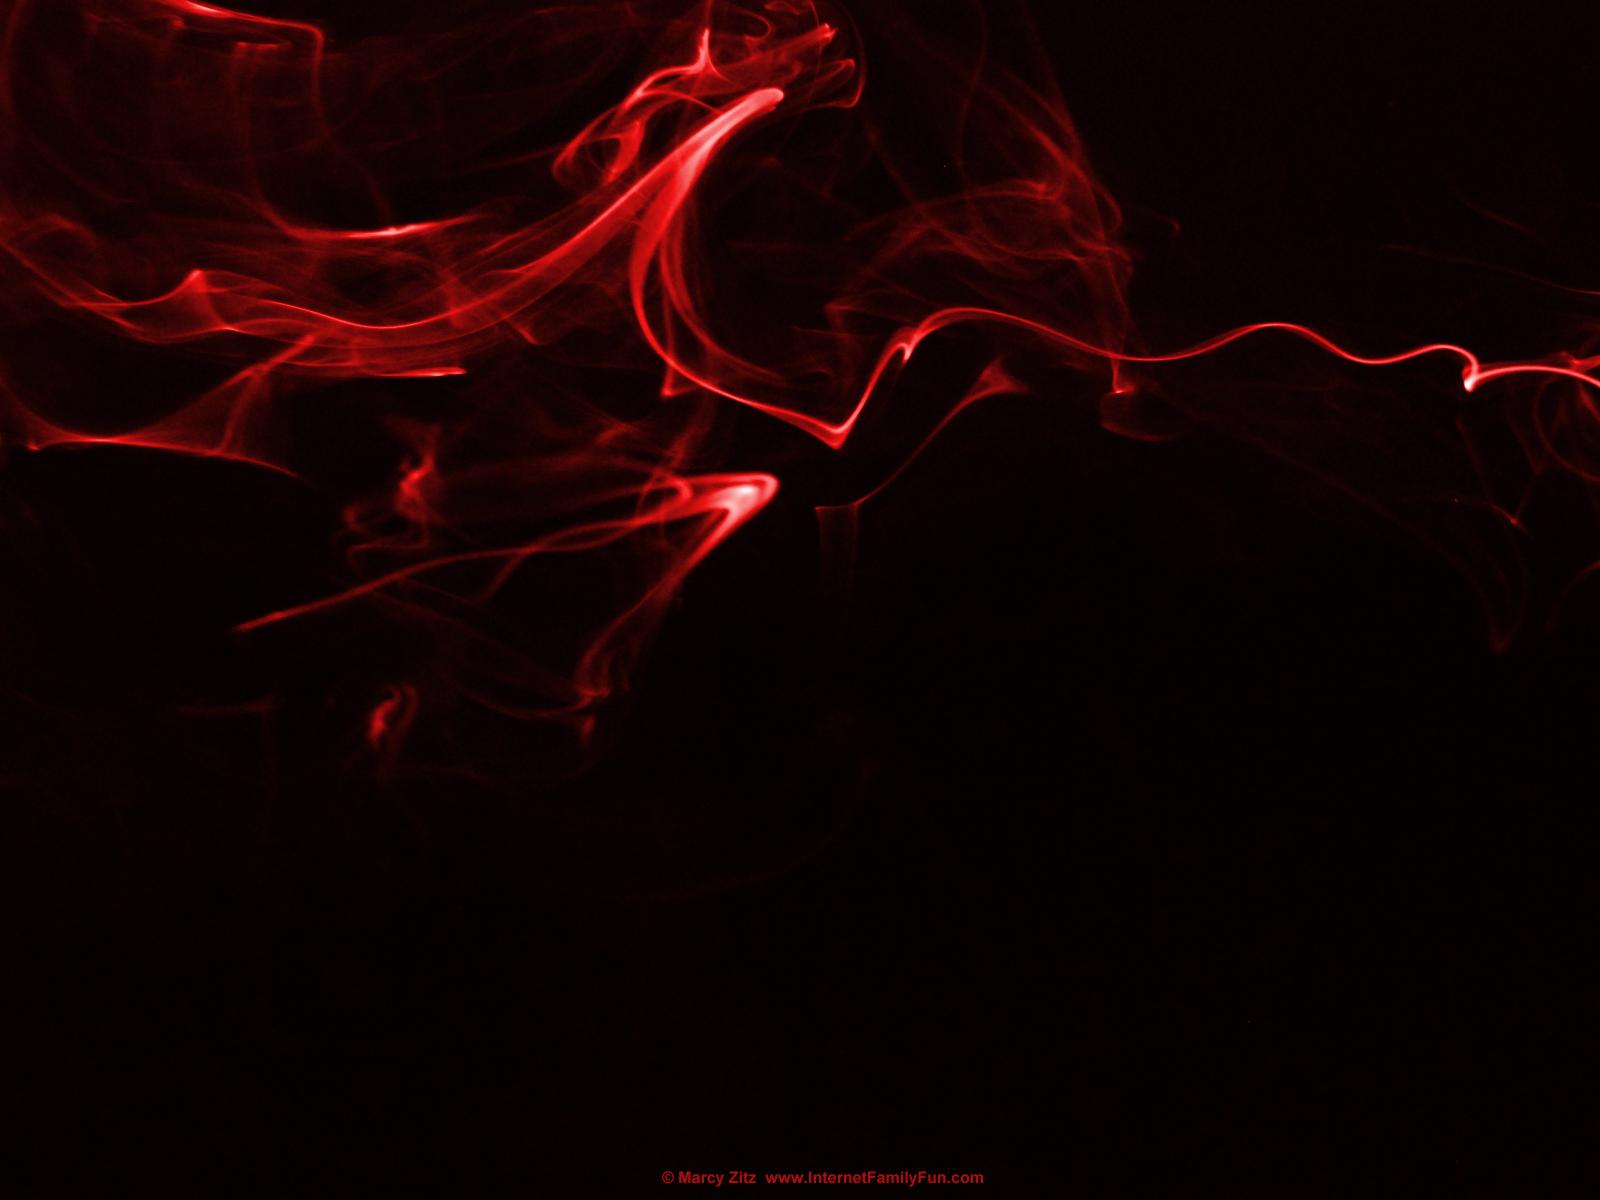 Abstract Smoke in Red 1 Wallpaper Background for Desktop